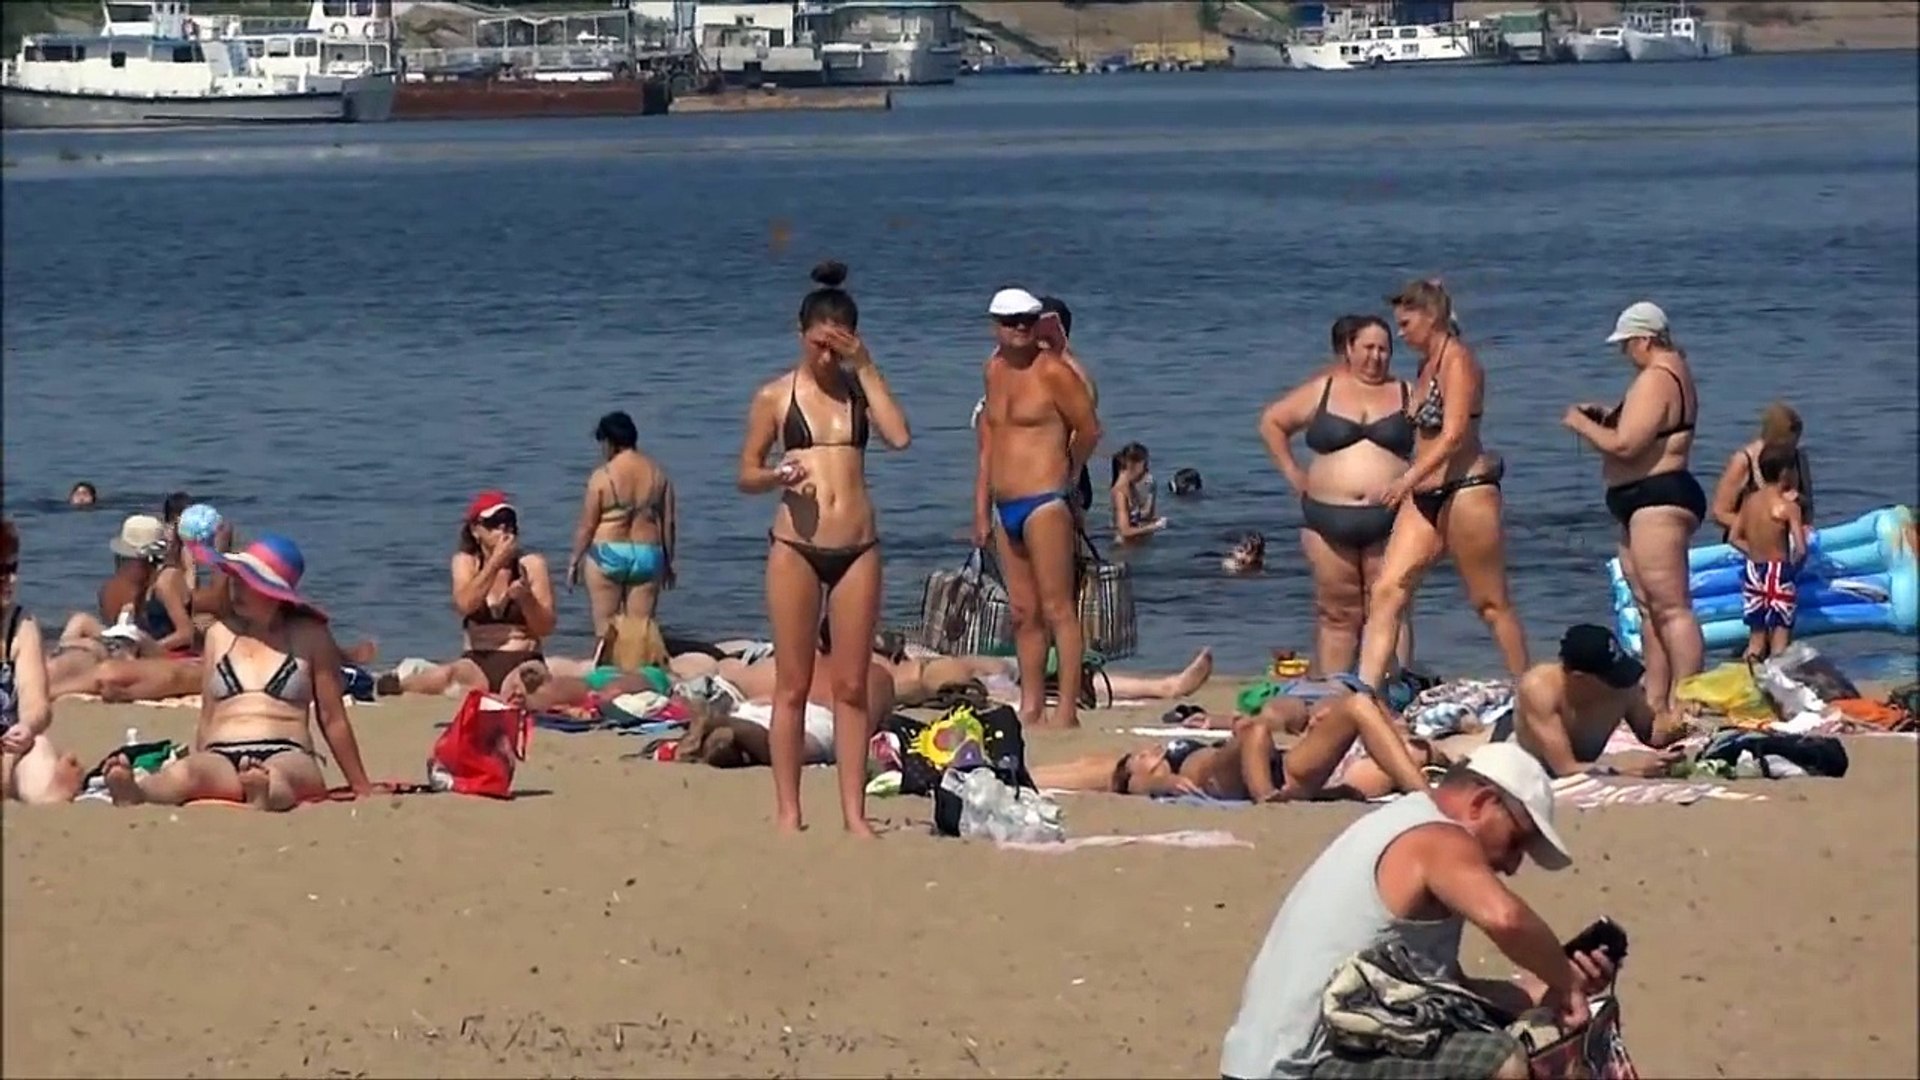 ⁣Russians on Beach. Summer 2013. Vlog: Russian Girl in Russia. P5